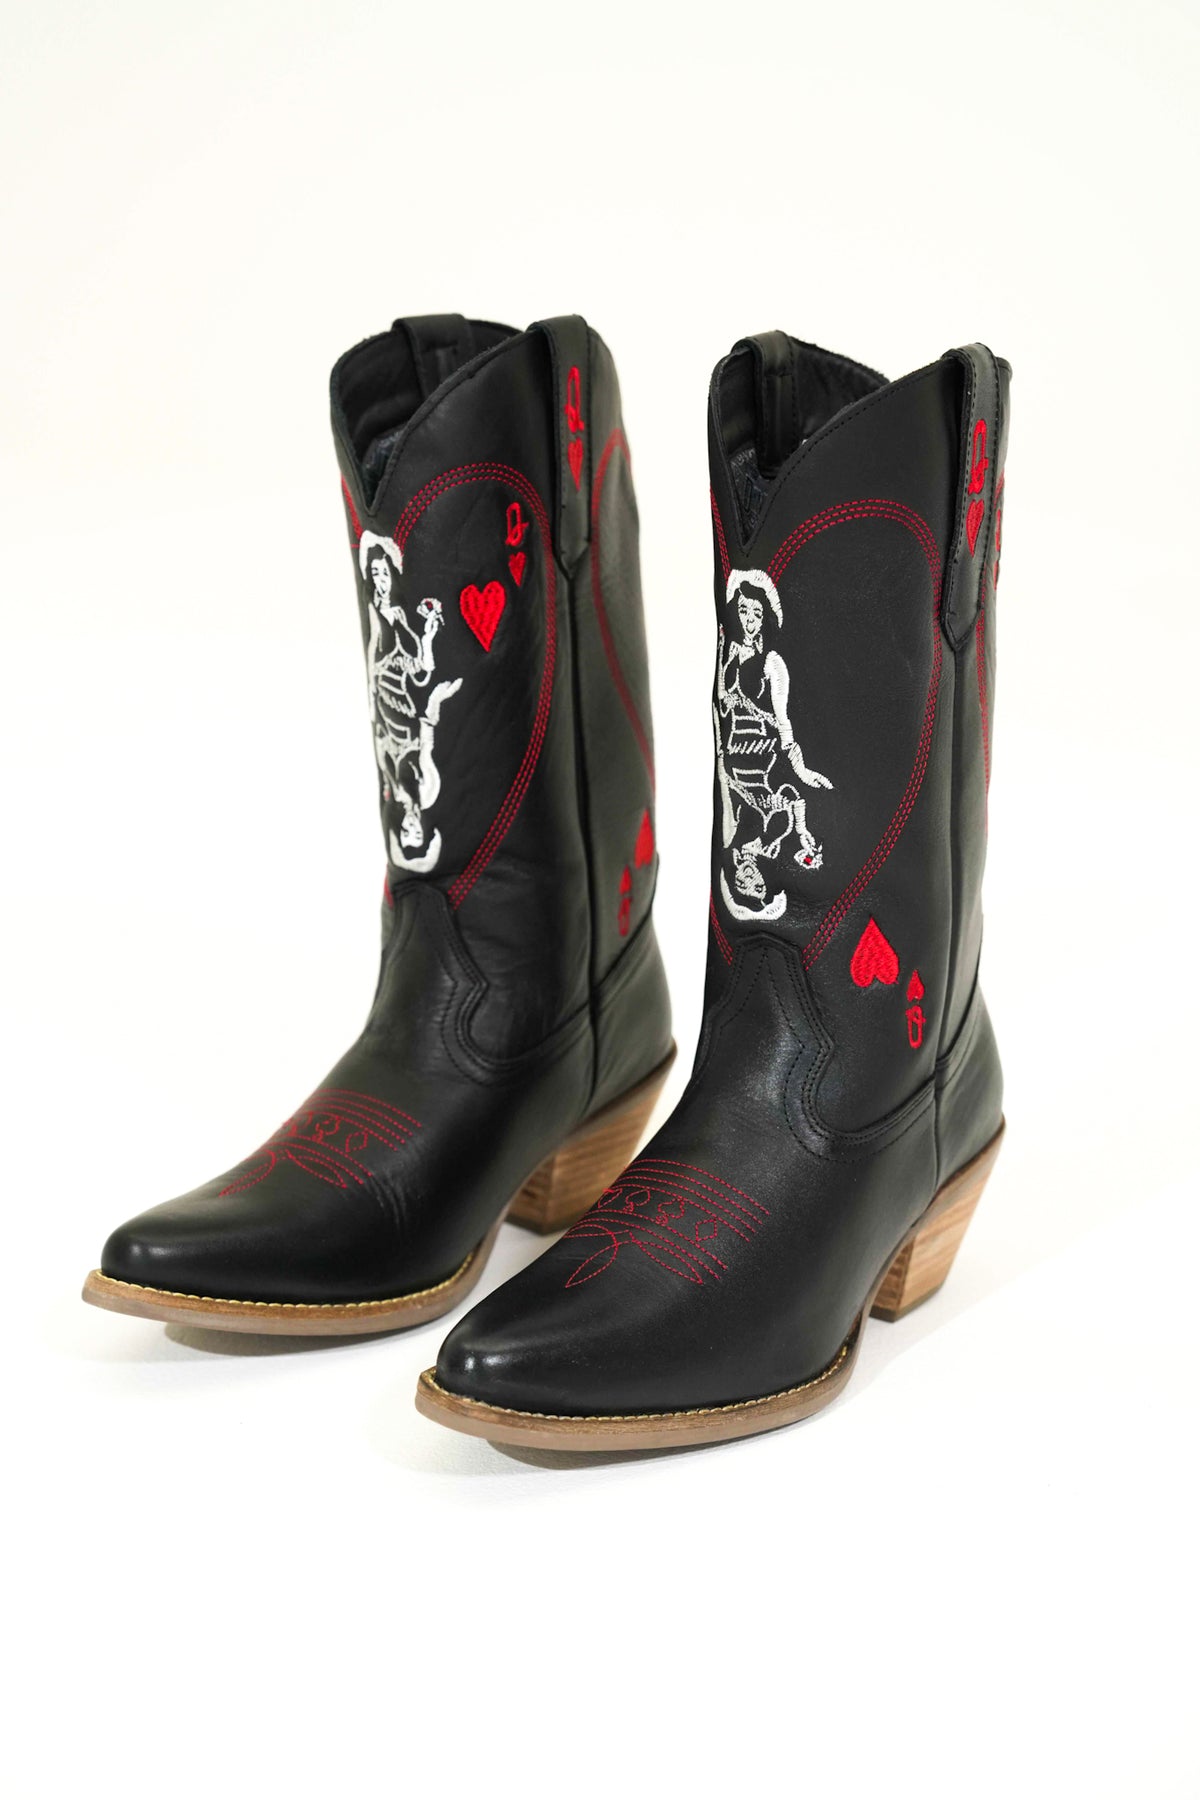 Queen A Hearts Leather Boot in Black